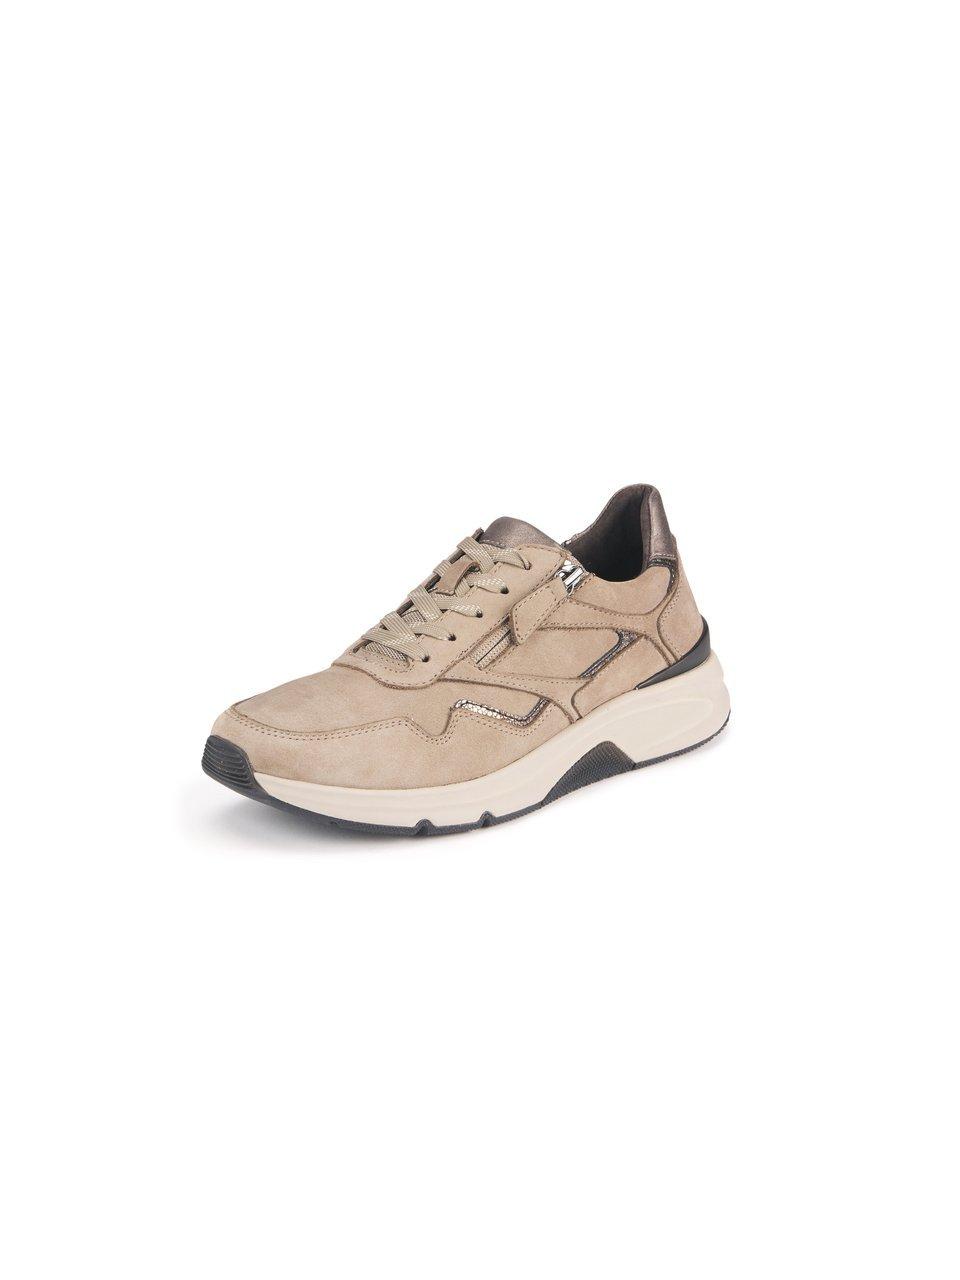 Gabor RS Sneaker Taupe